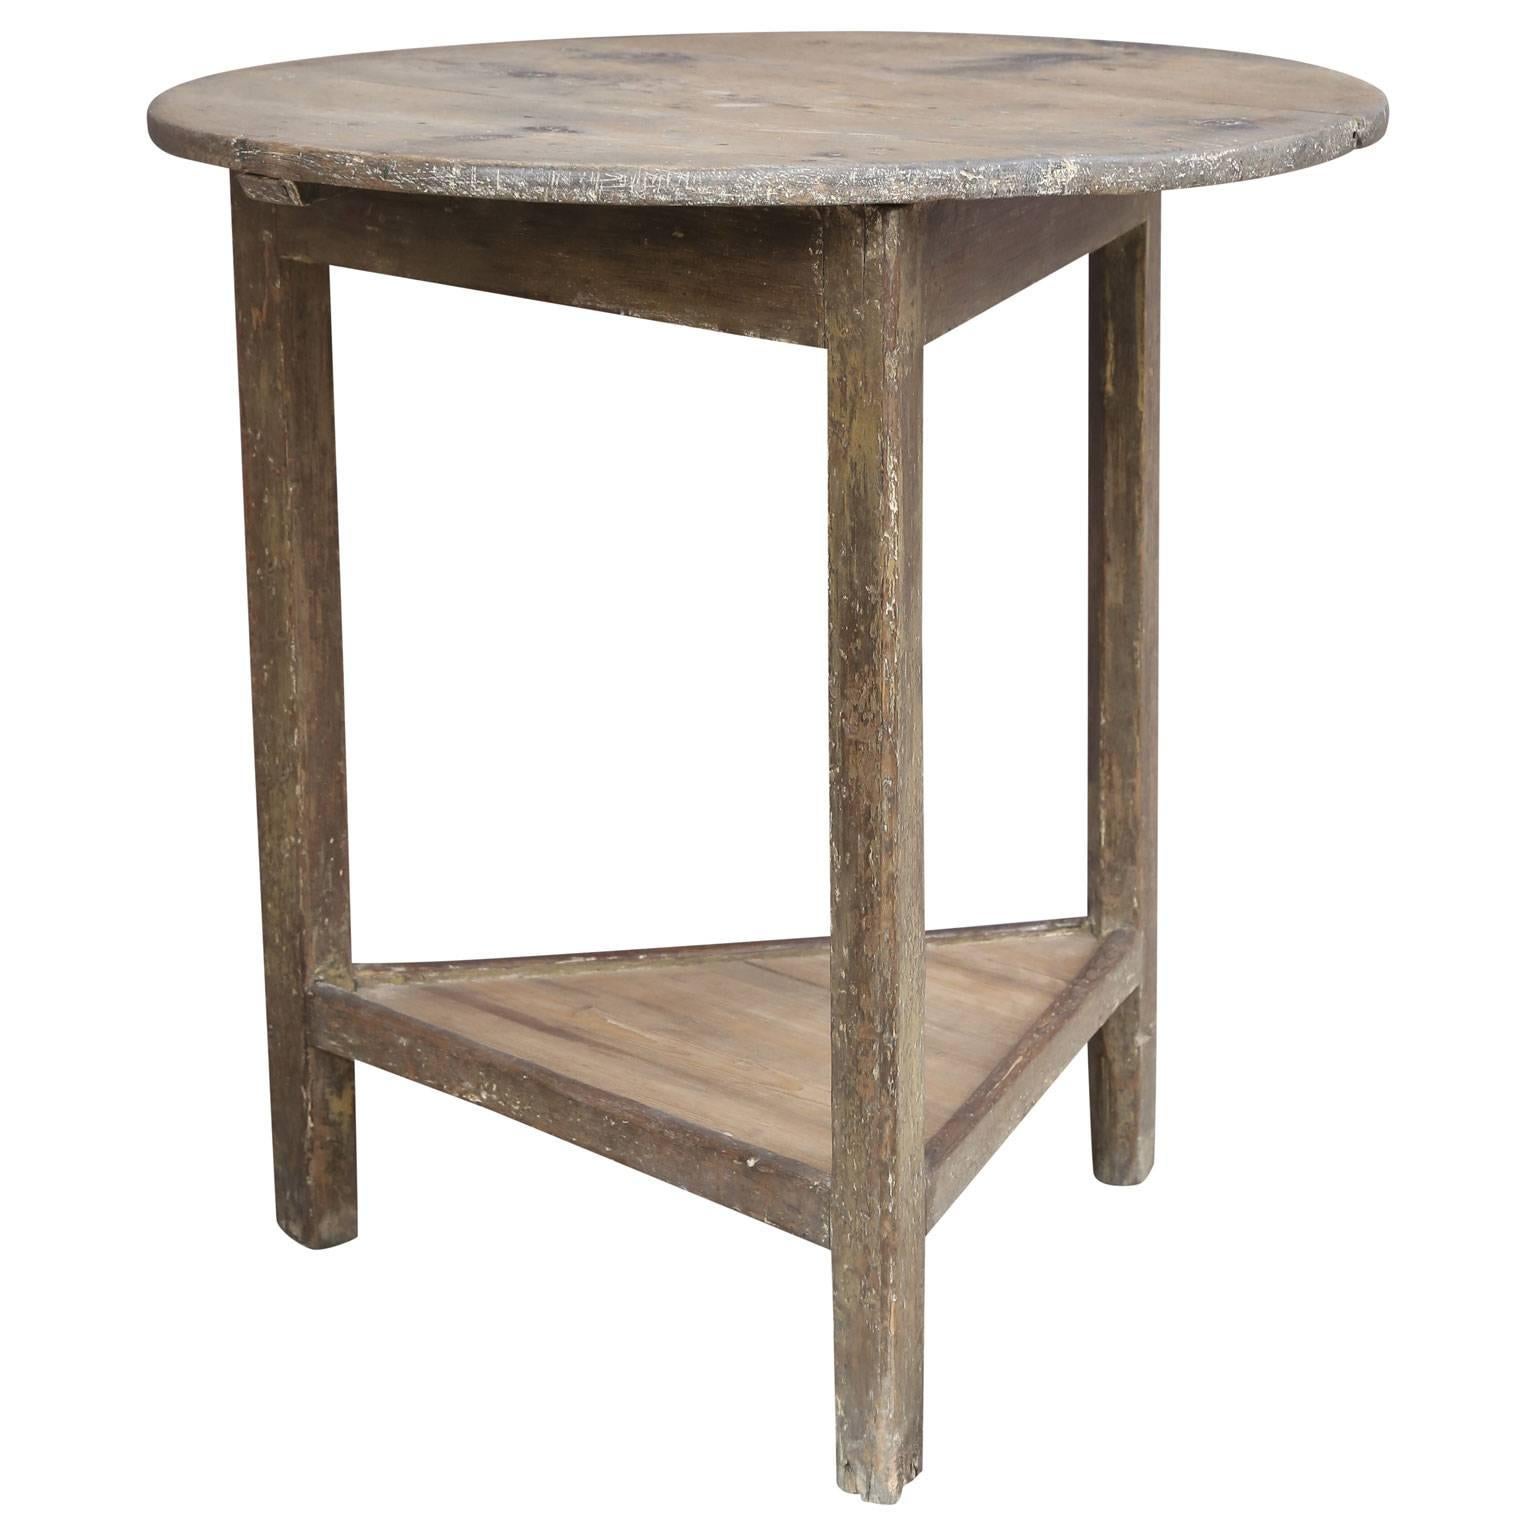 English pine cricket table with naturally scrubbed circular pine top, scrubbed under-shelf and faint remnants of original paint; perfect height and size to function as a side or end table. This table is in very good, correct condition and dates from